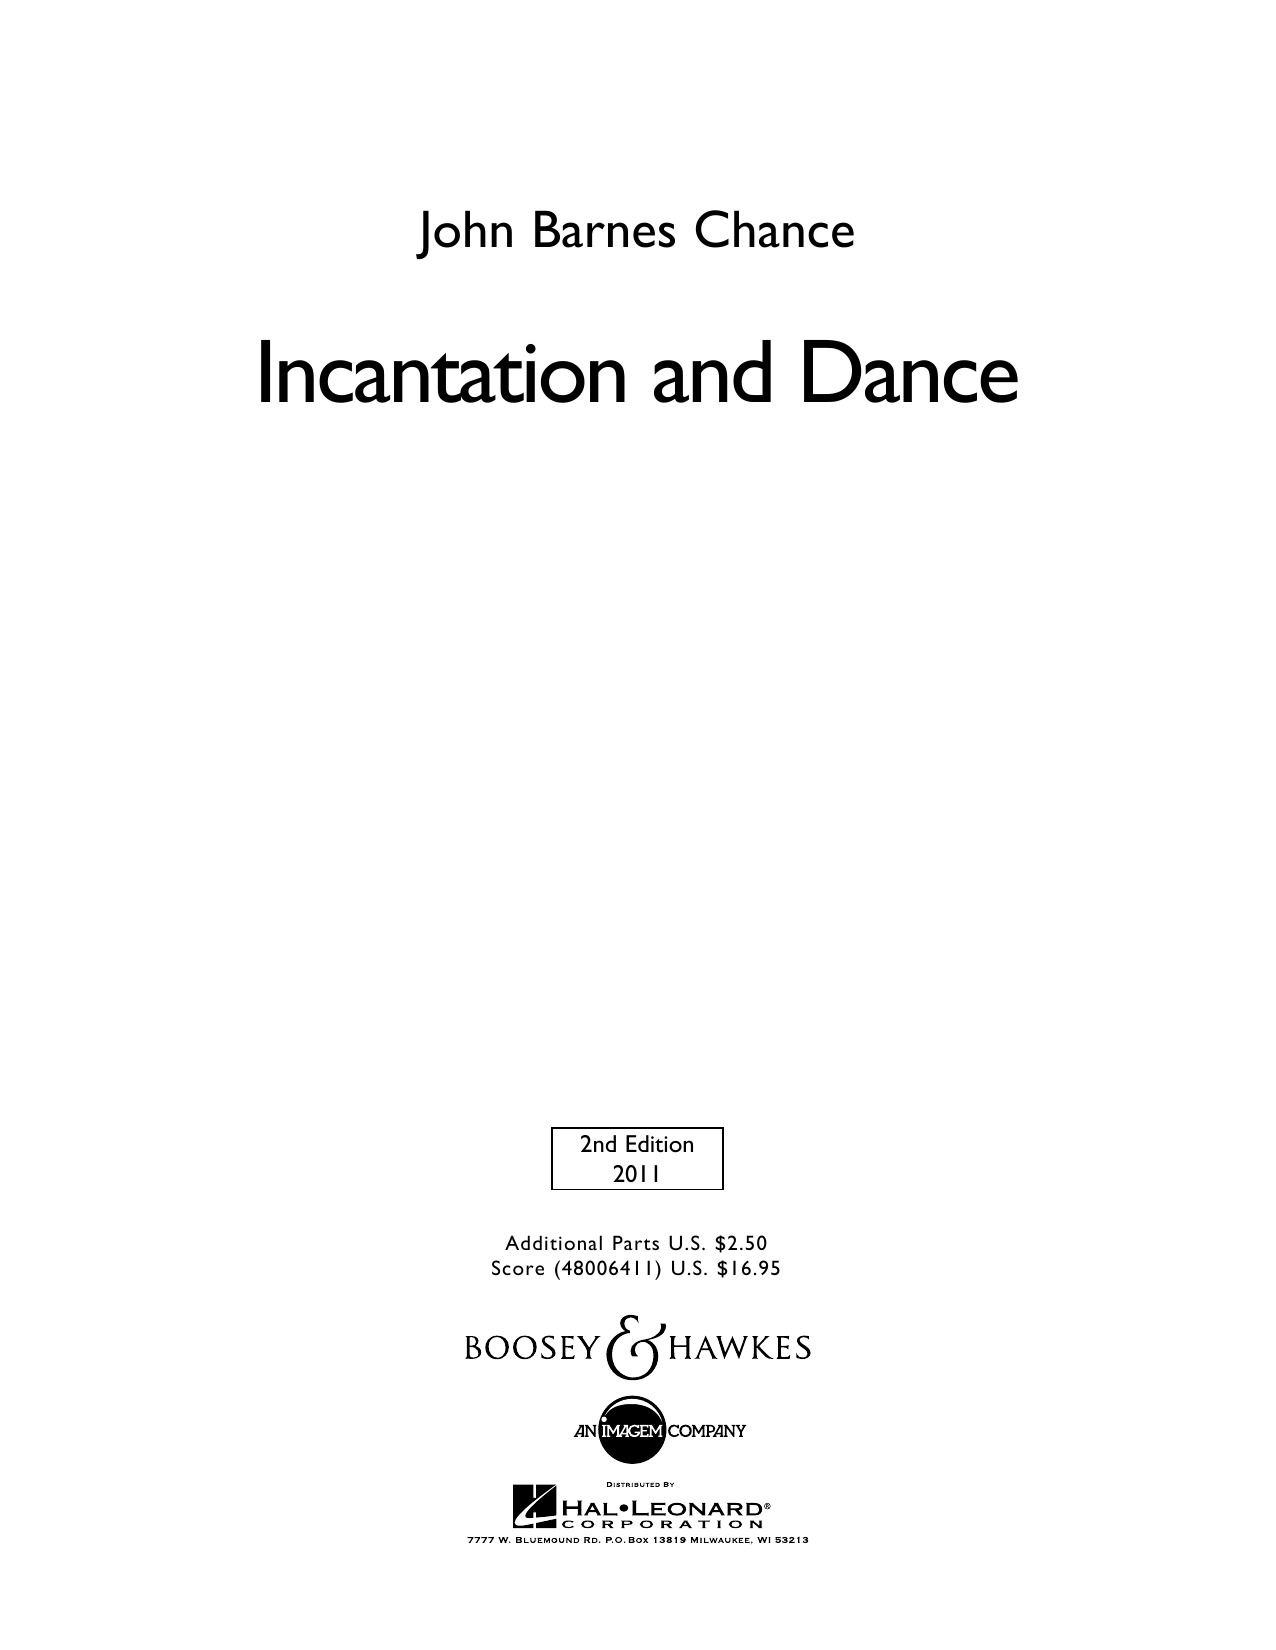 John Barnes Chance Incantation and Dance - Full Score sheet music preview music notes and score for Concert Band including 40 page(s)